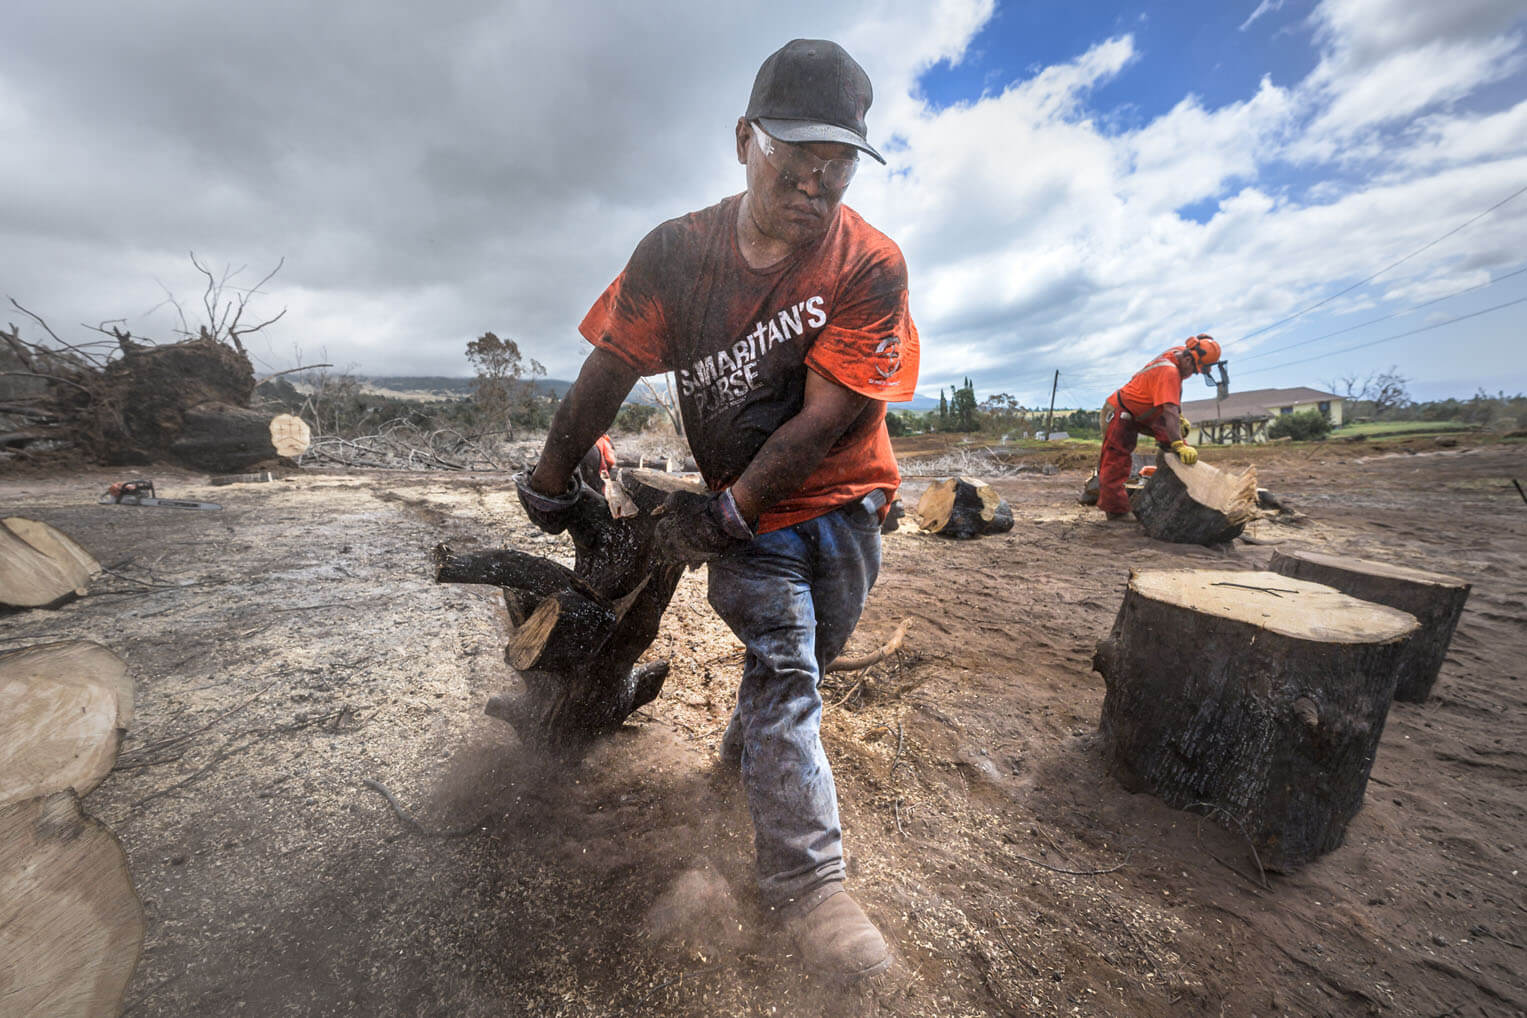 This local volunteer's soot-covered arms, shirt, and face are the tell-tale markings of work among the ashes of former homes and forests in this scorched paradise.